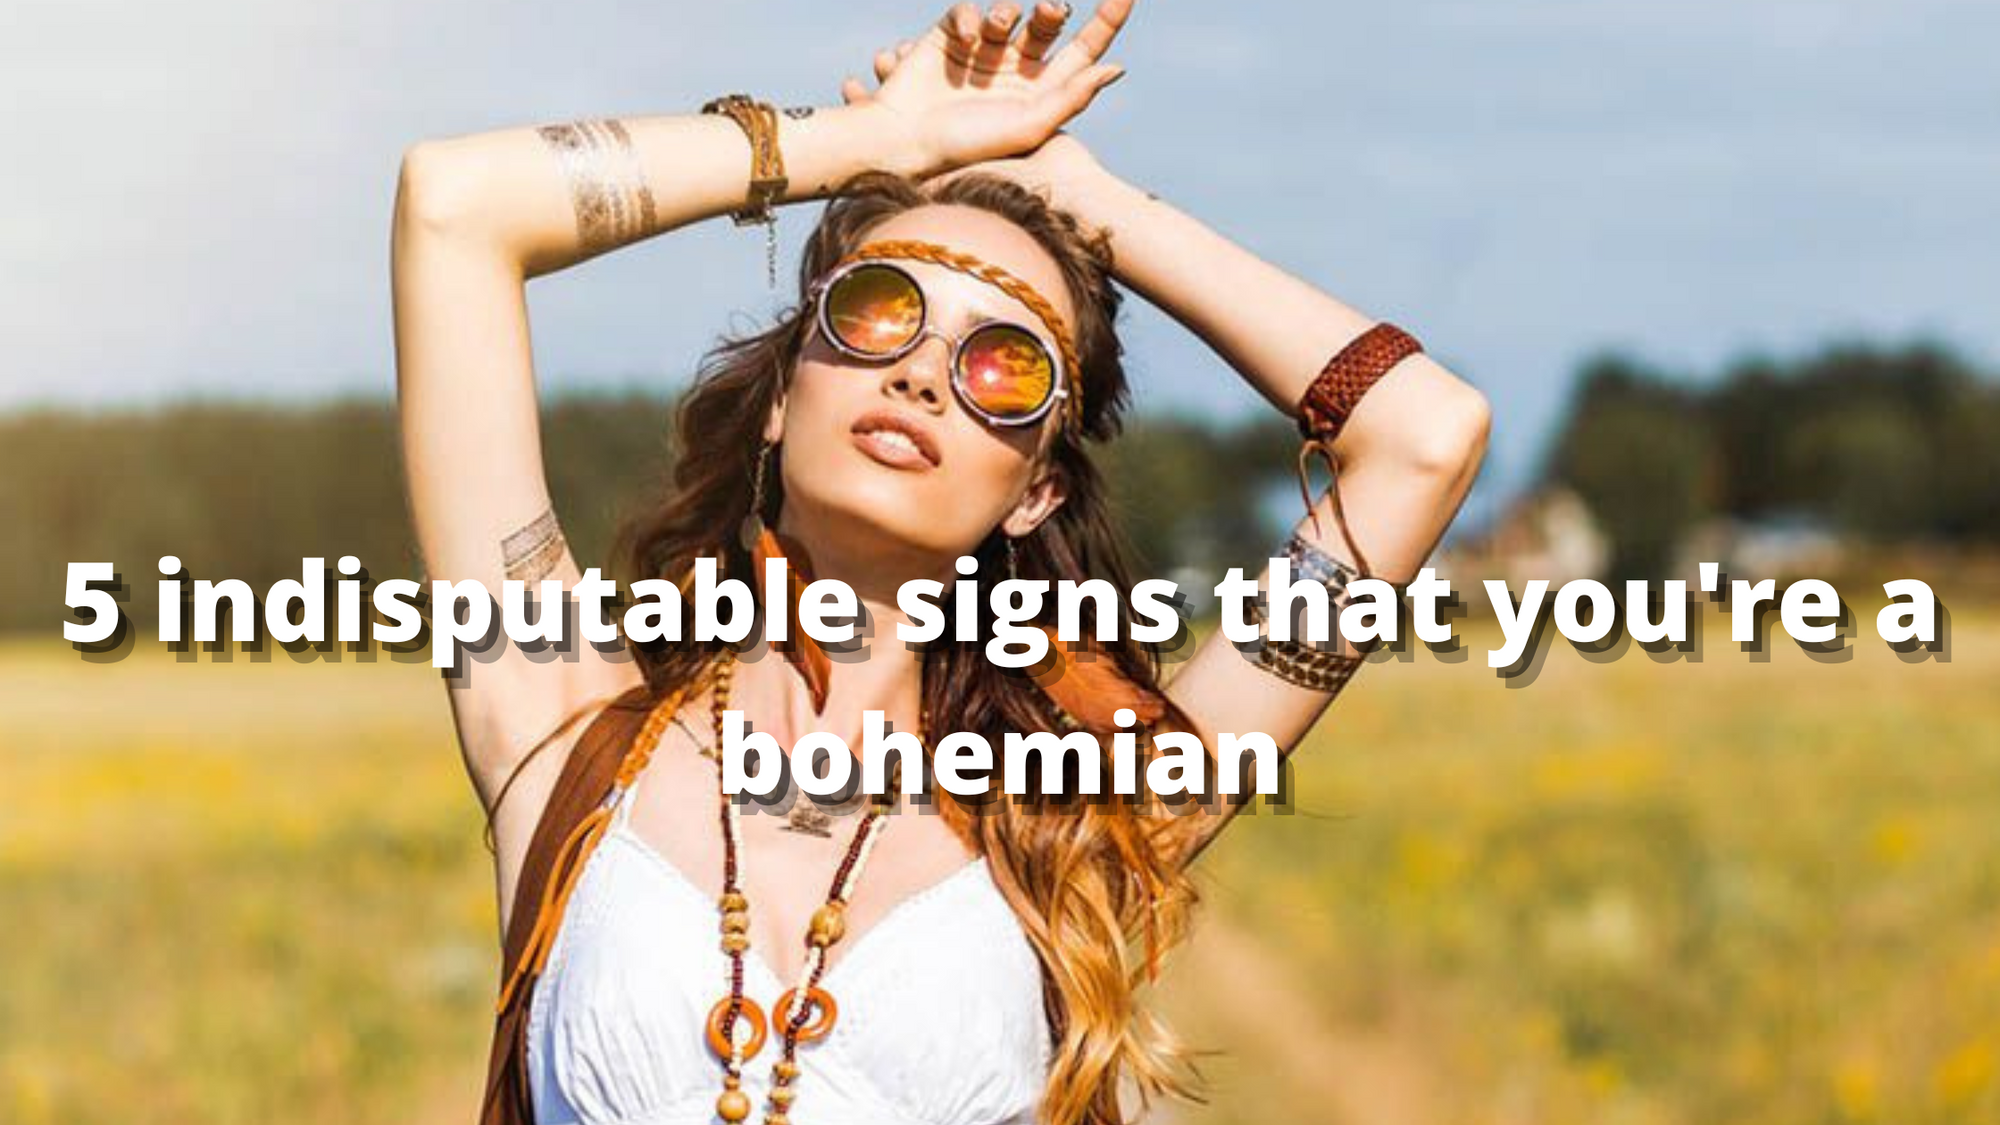 5 indisputable signs that you're a bohemian